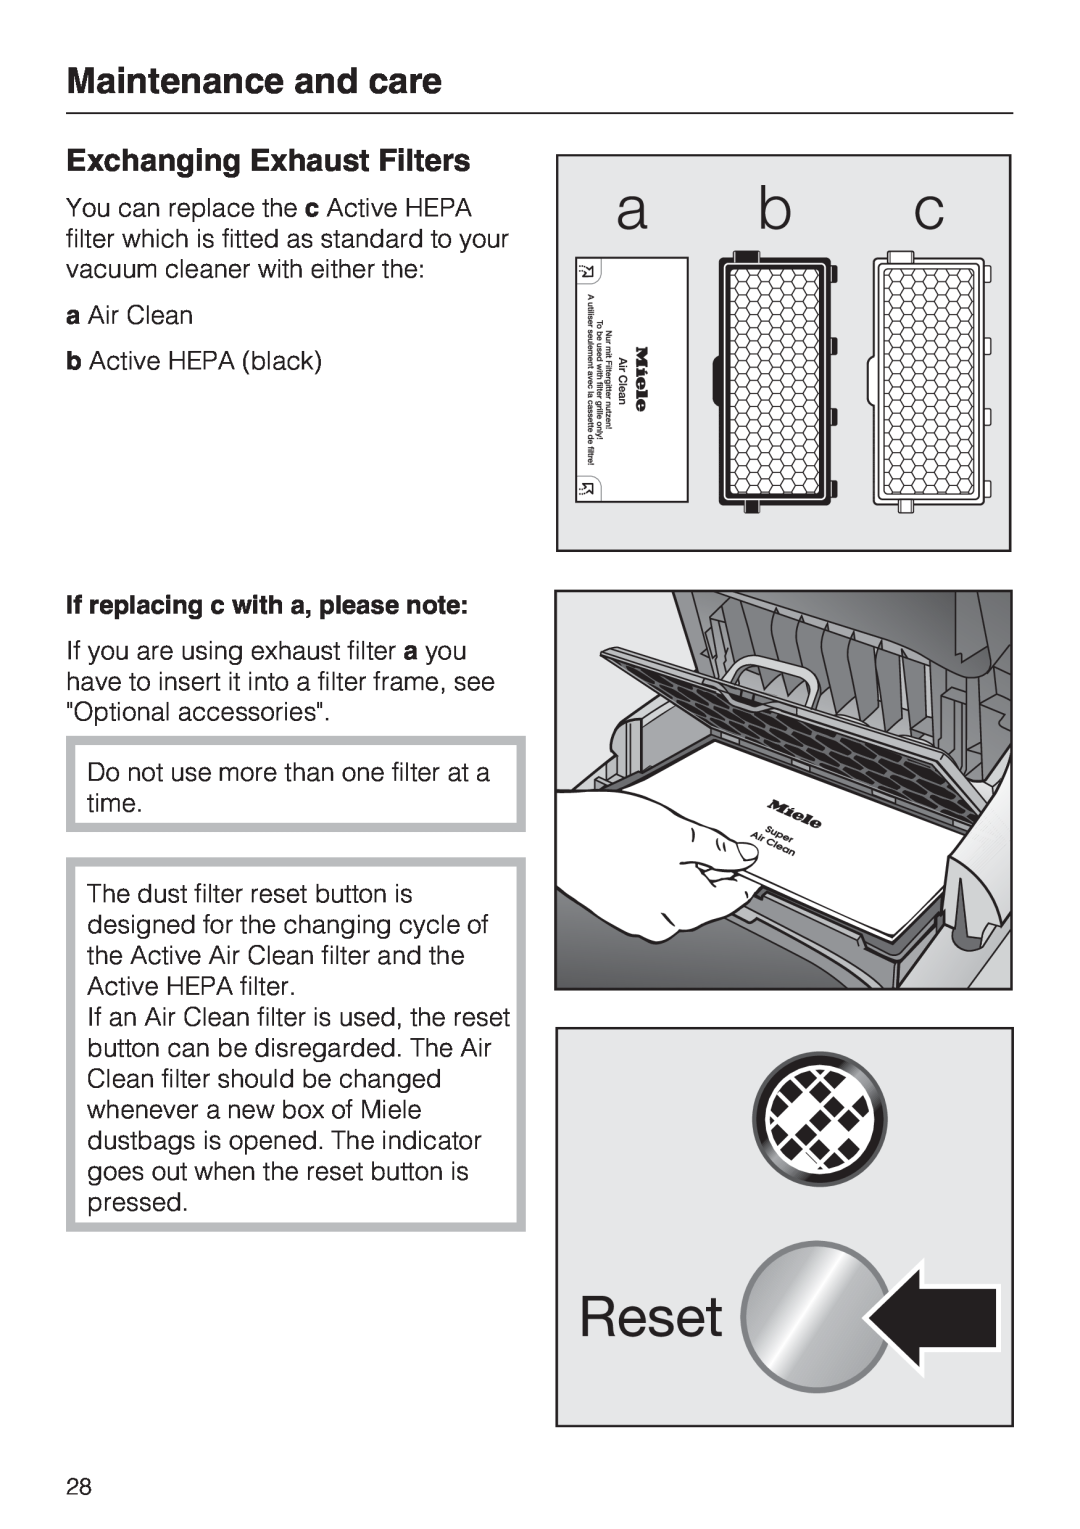 Miele S5981 operating instructions Exchanging Exhaust Filters, If replacing c with a, please note, Maintenance and care 